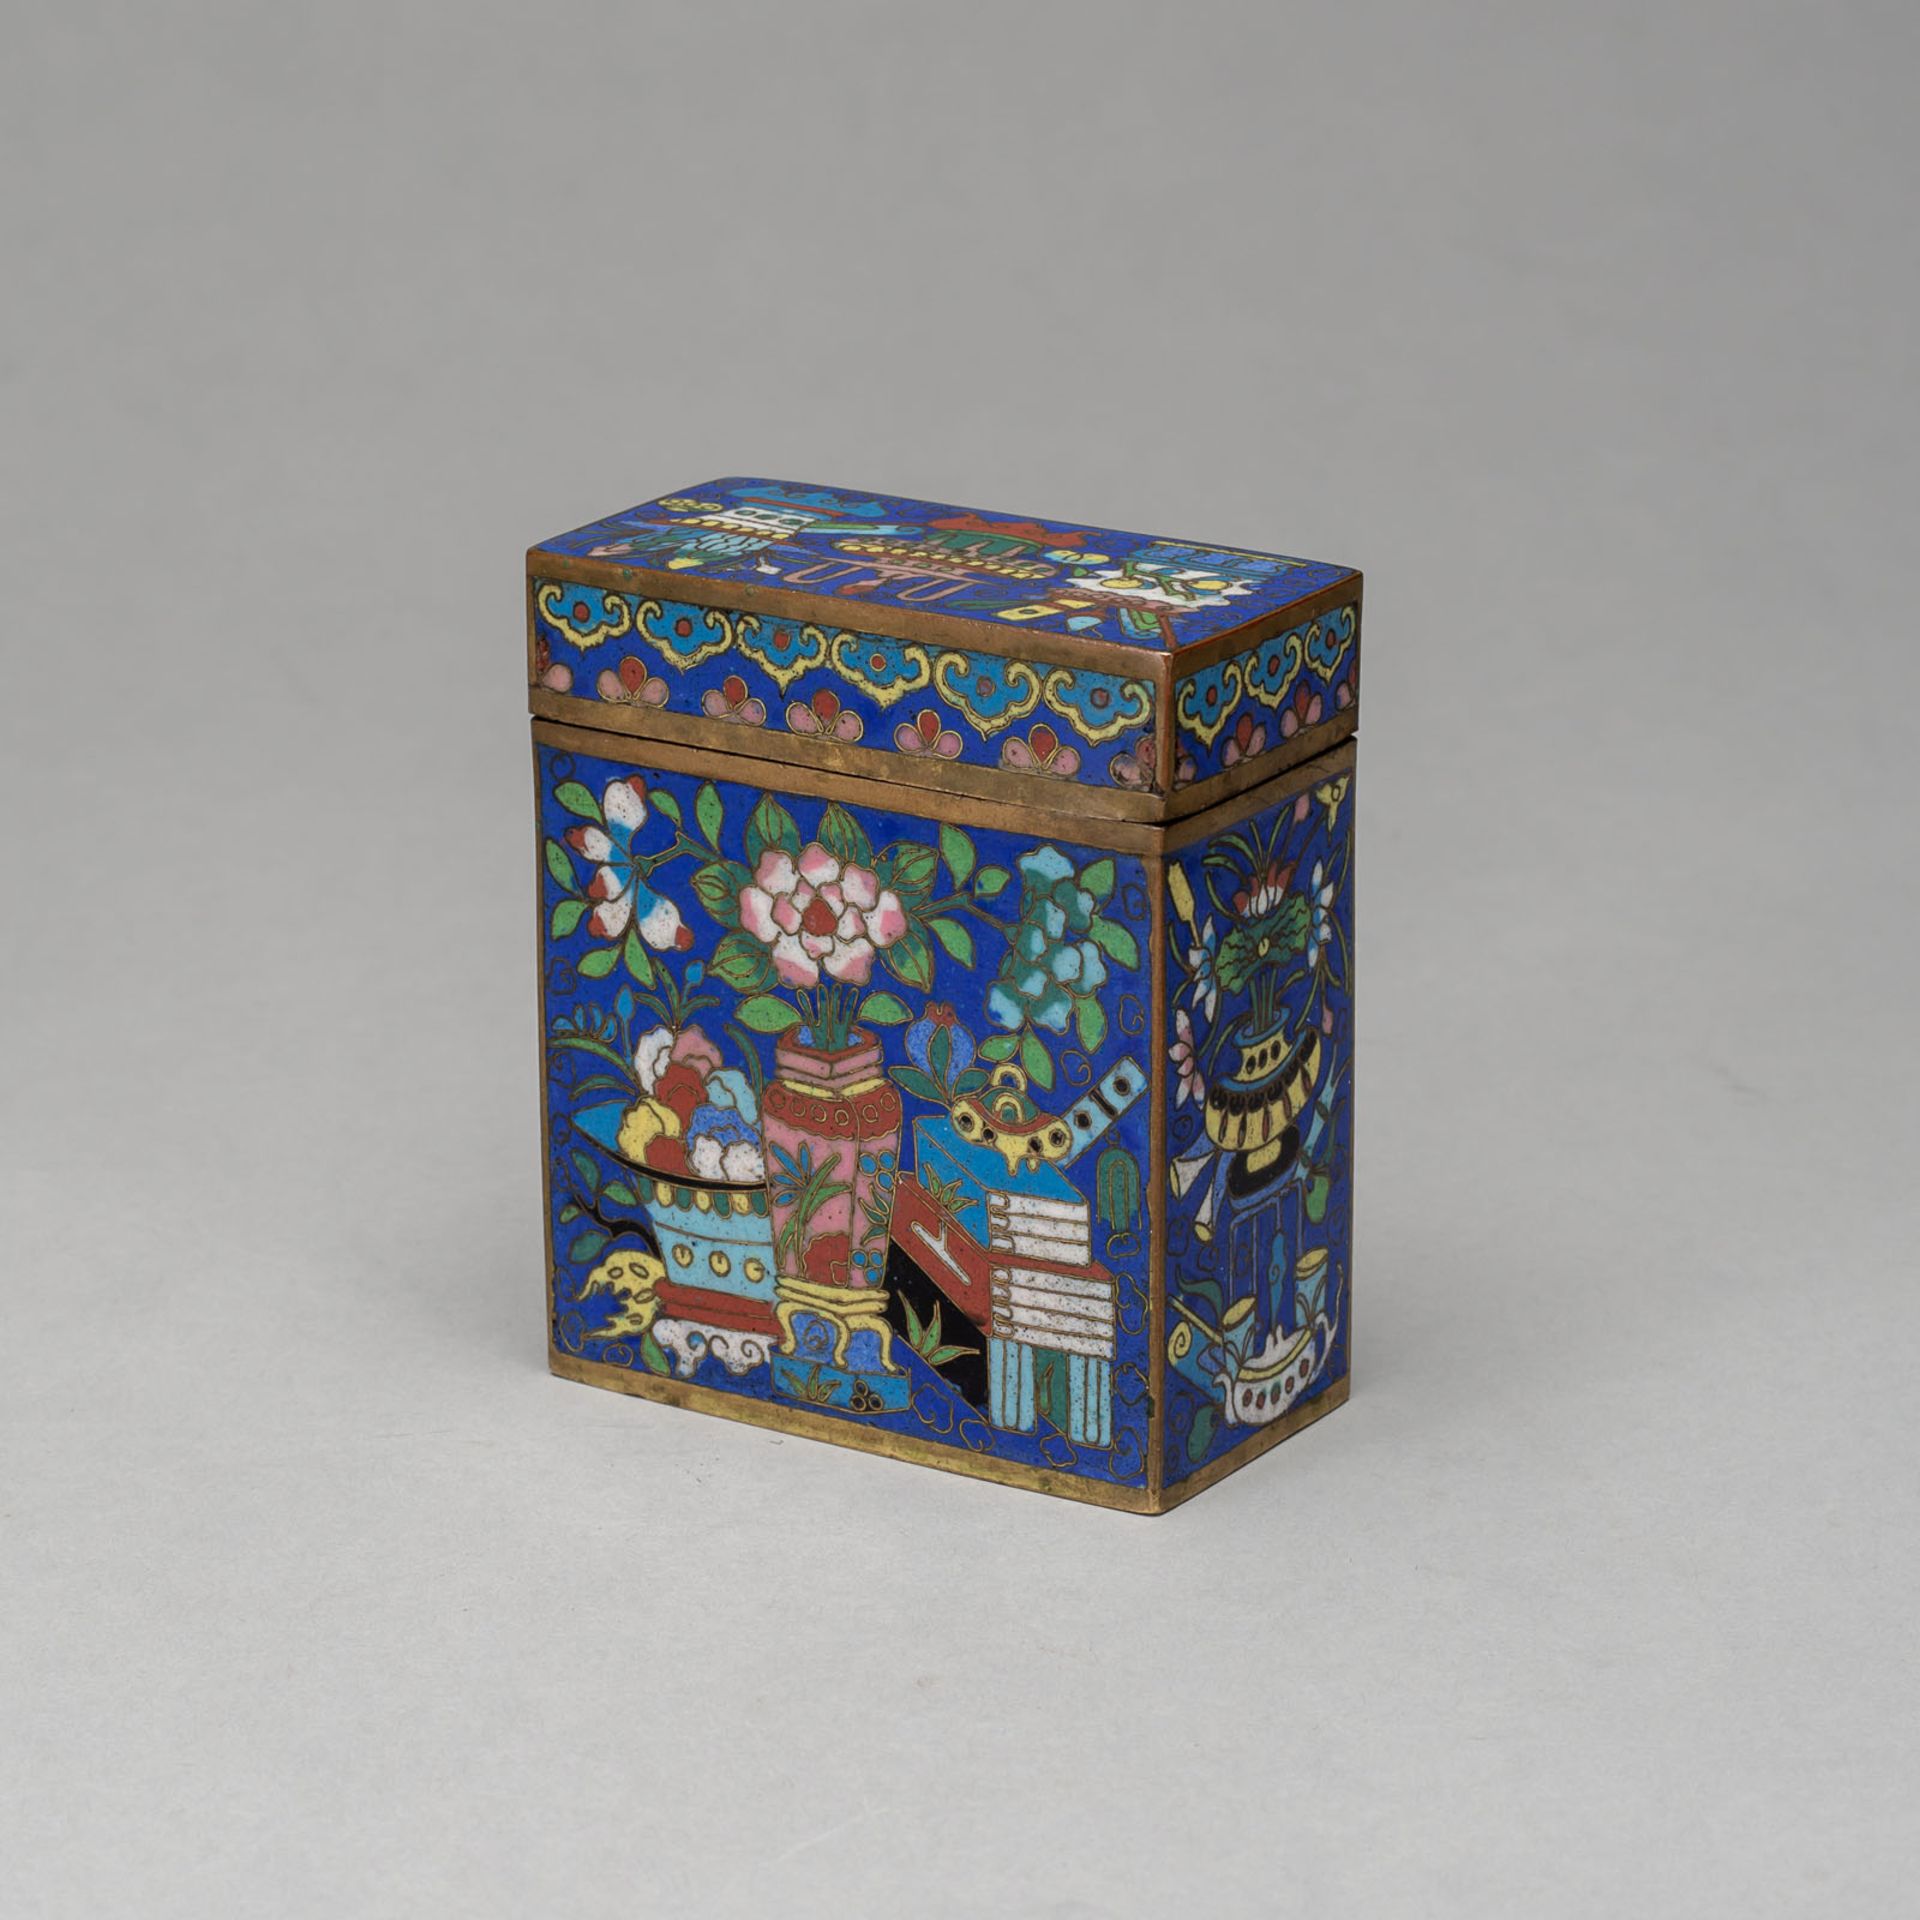 A CLOISONNÉ ENAMEL FLOWERS AND ANTIQUITIES BOX WITH COVER - Image 2 of 3